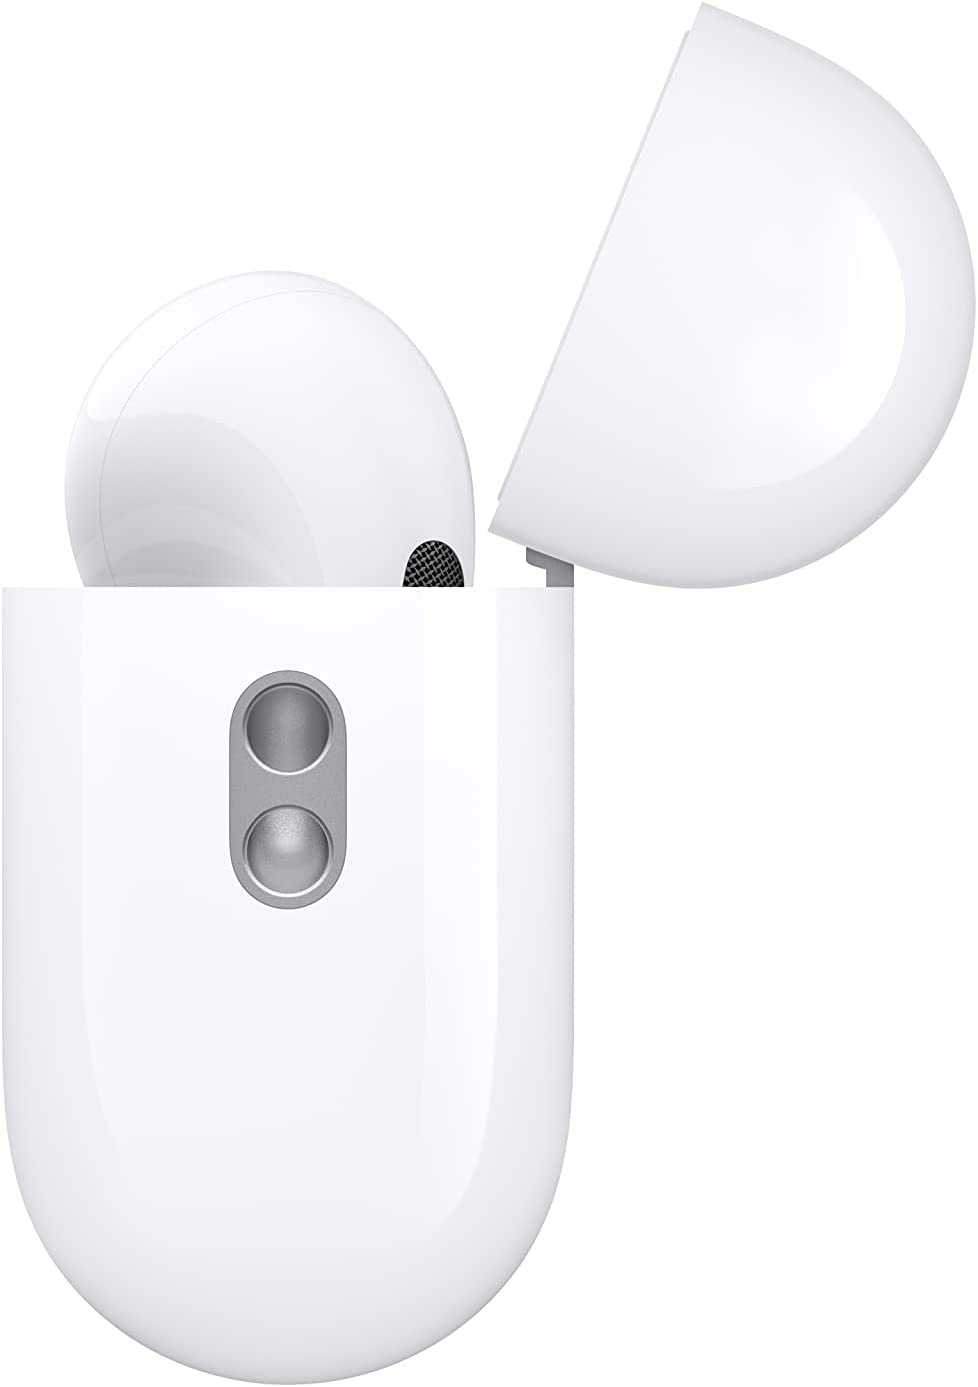 A side view of a pair of Apple AirPods in a charging case.